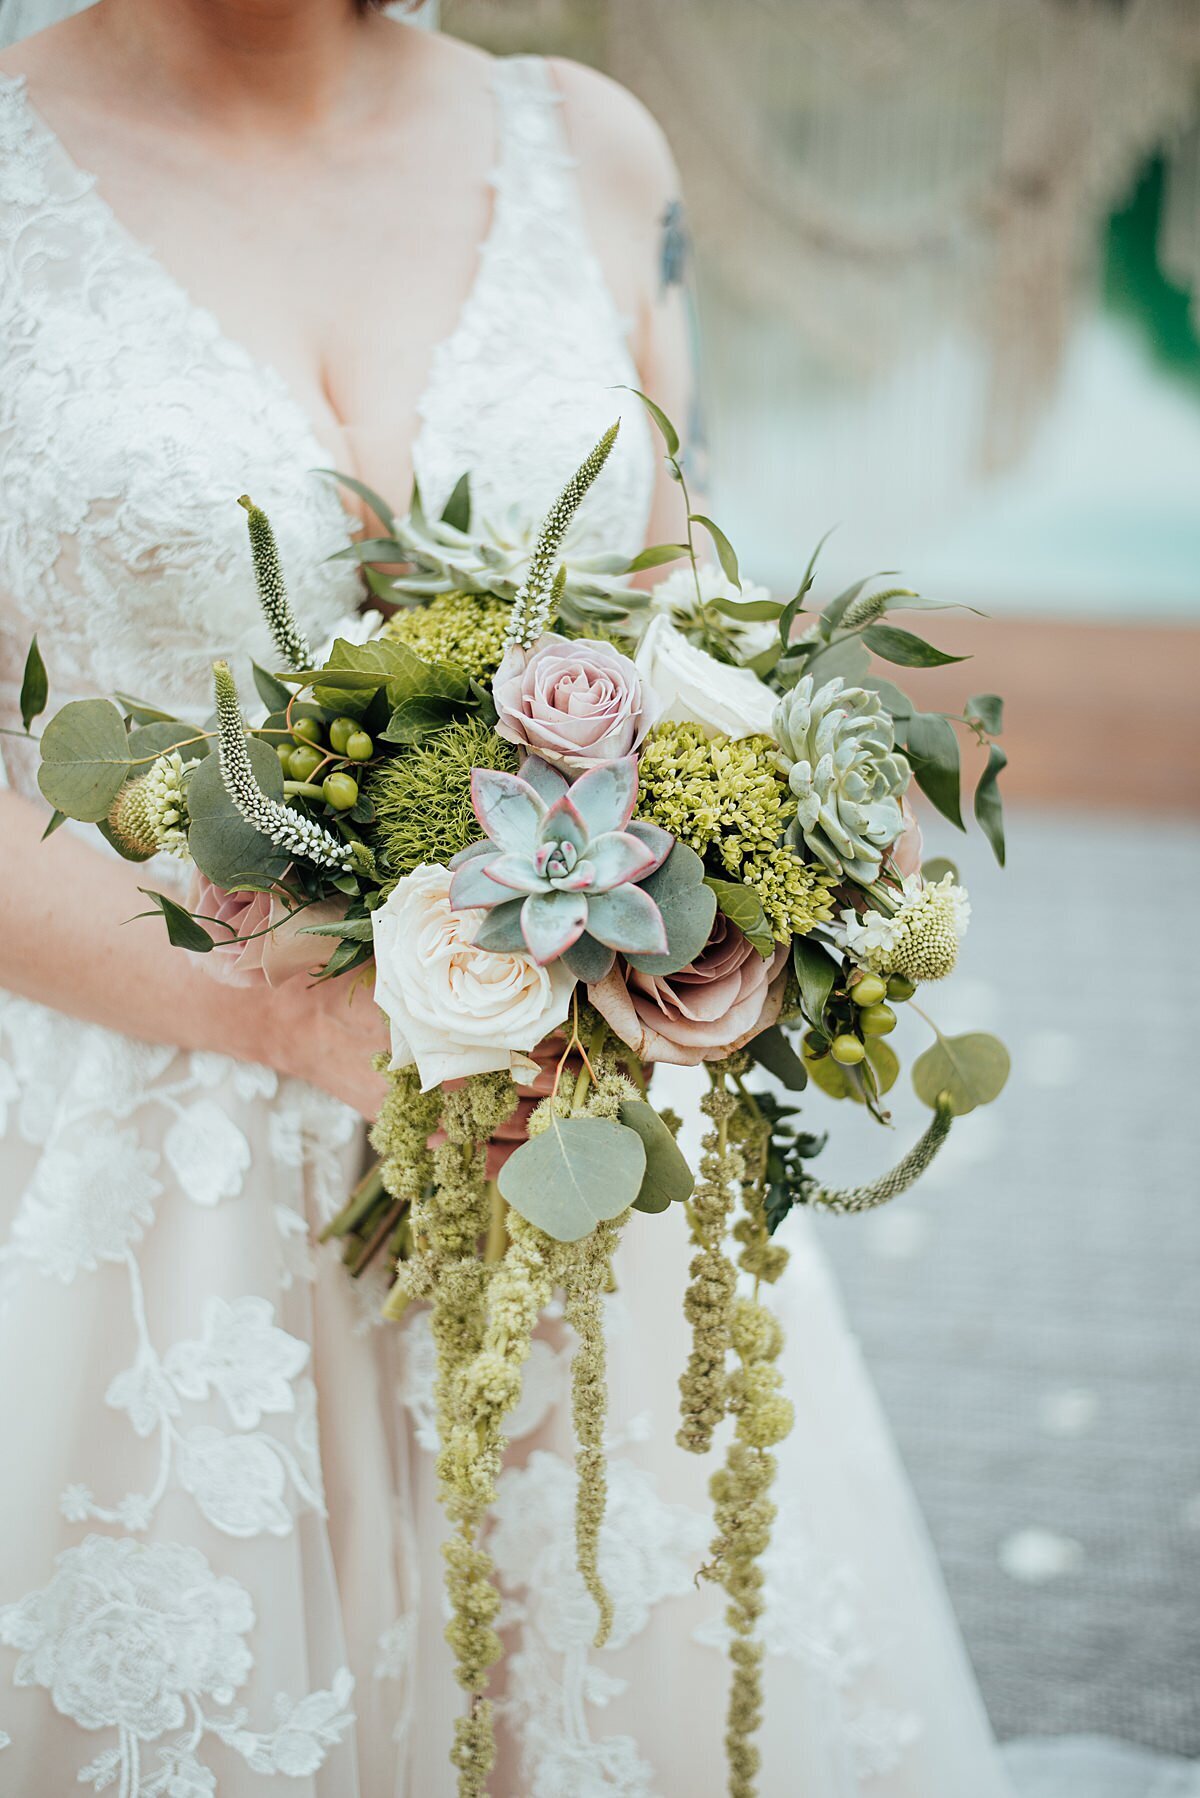 A cascading boho bridal bouquet with ivory roses, blush roses, green succulents, green carnations, silver dollar eucalyptus, white veronica and long cascades of green flowers. The bride is wearing an ivory lace wedding dress with a plunging neckline.